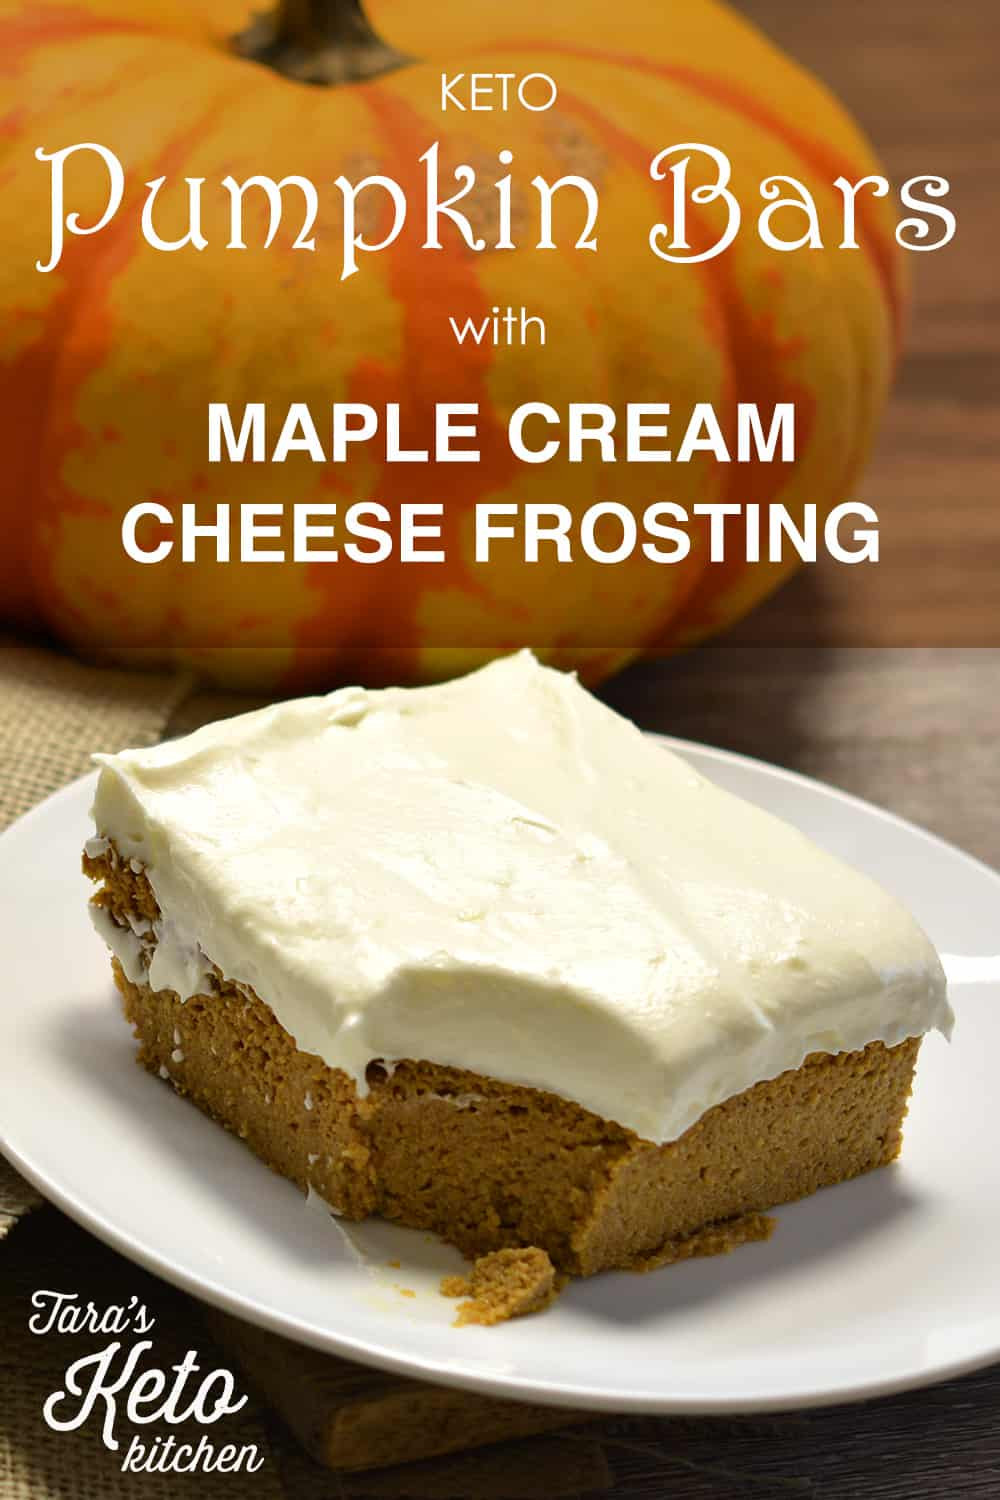 Pumpkin Keto Bars
 Keto Pumpkin Bars with Maple Cream Cheese Frosting from